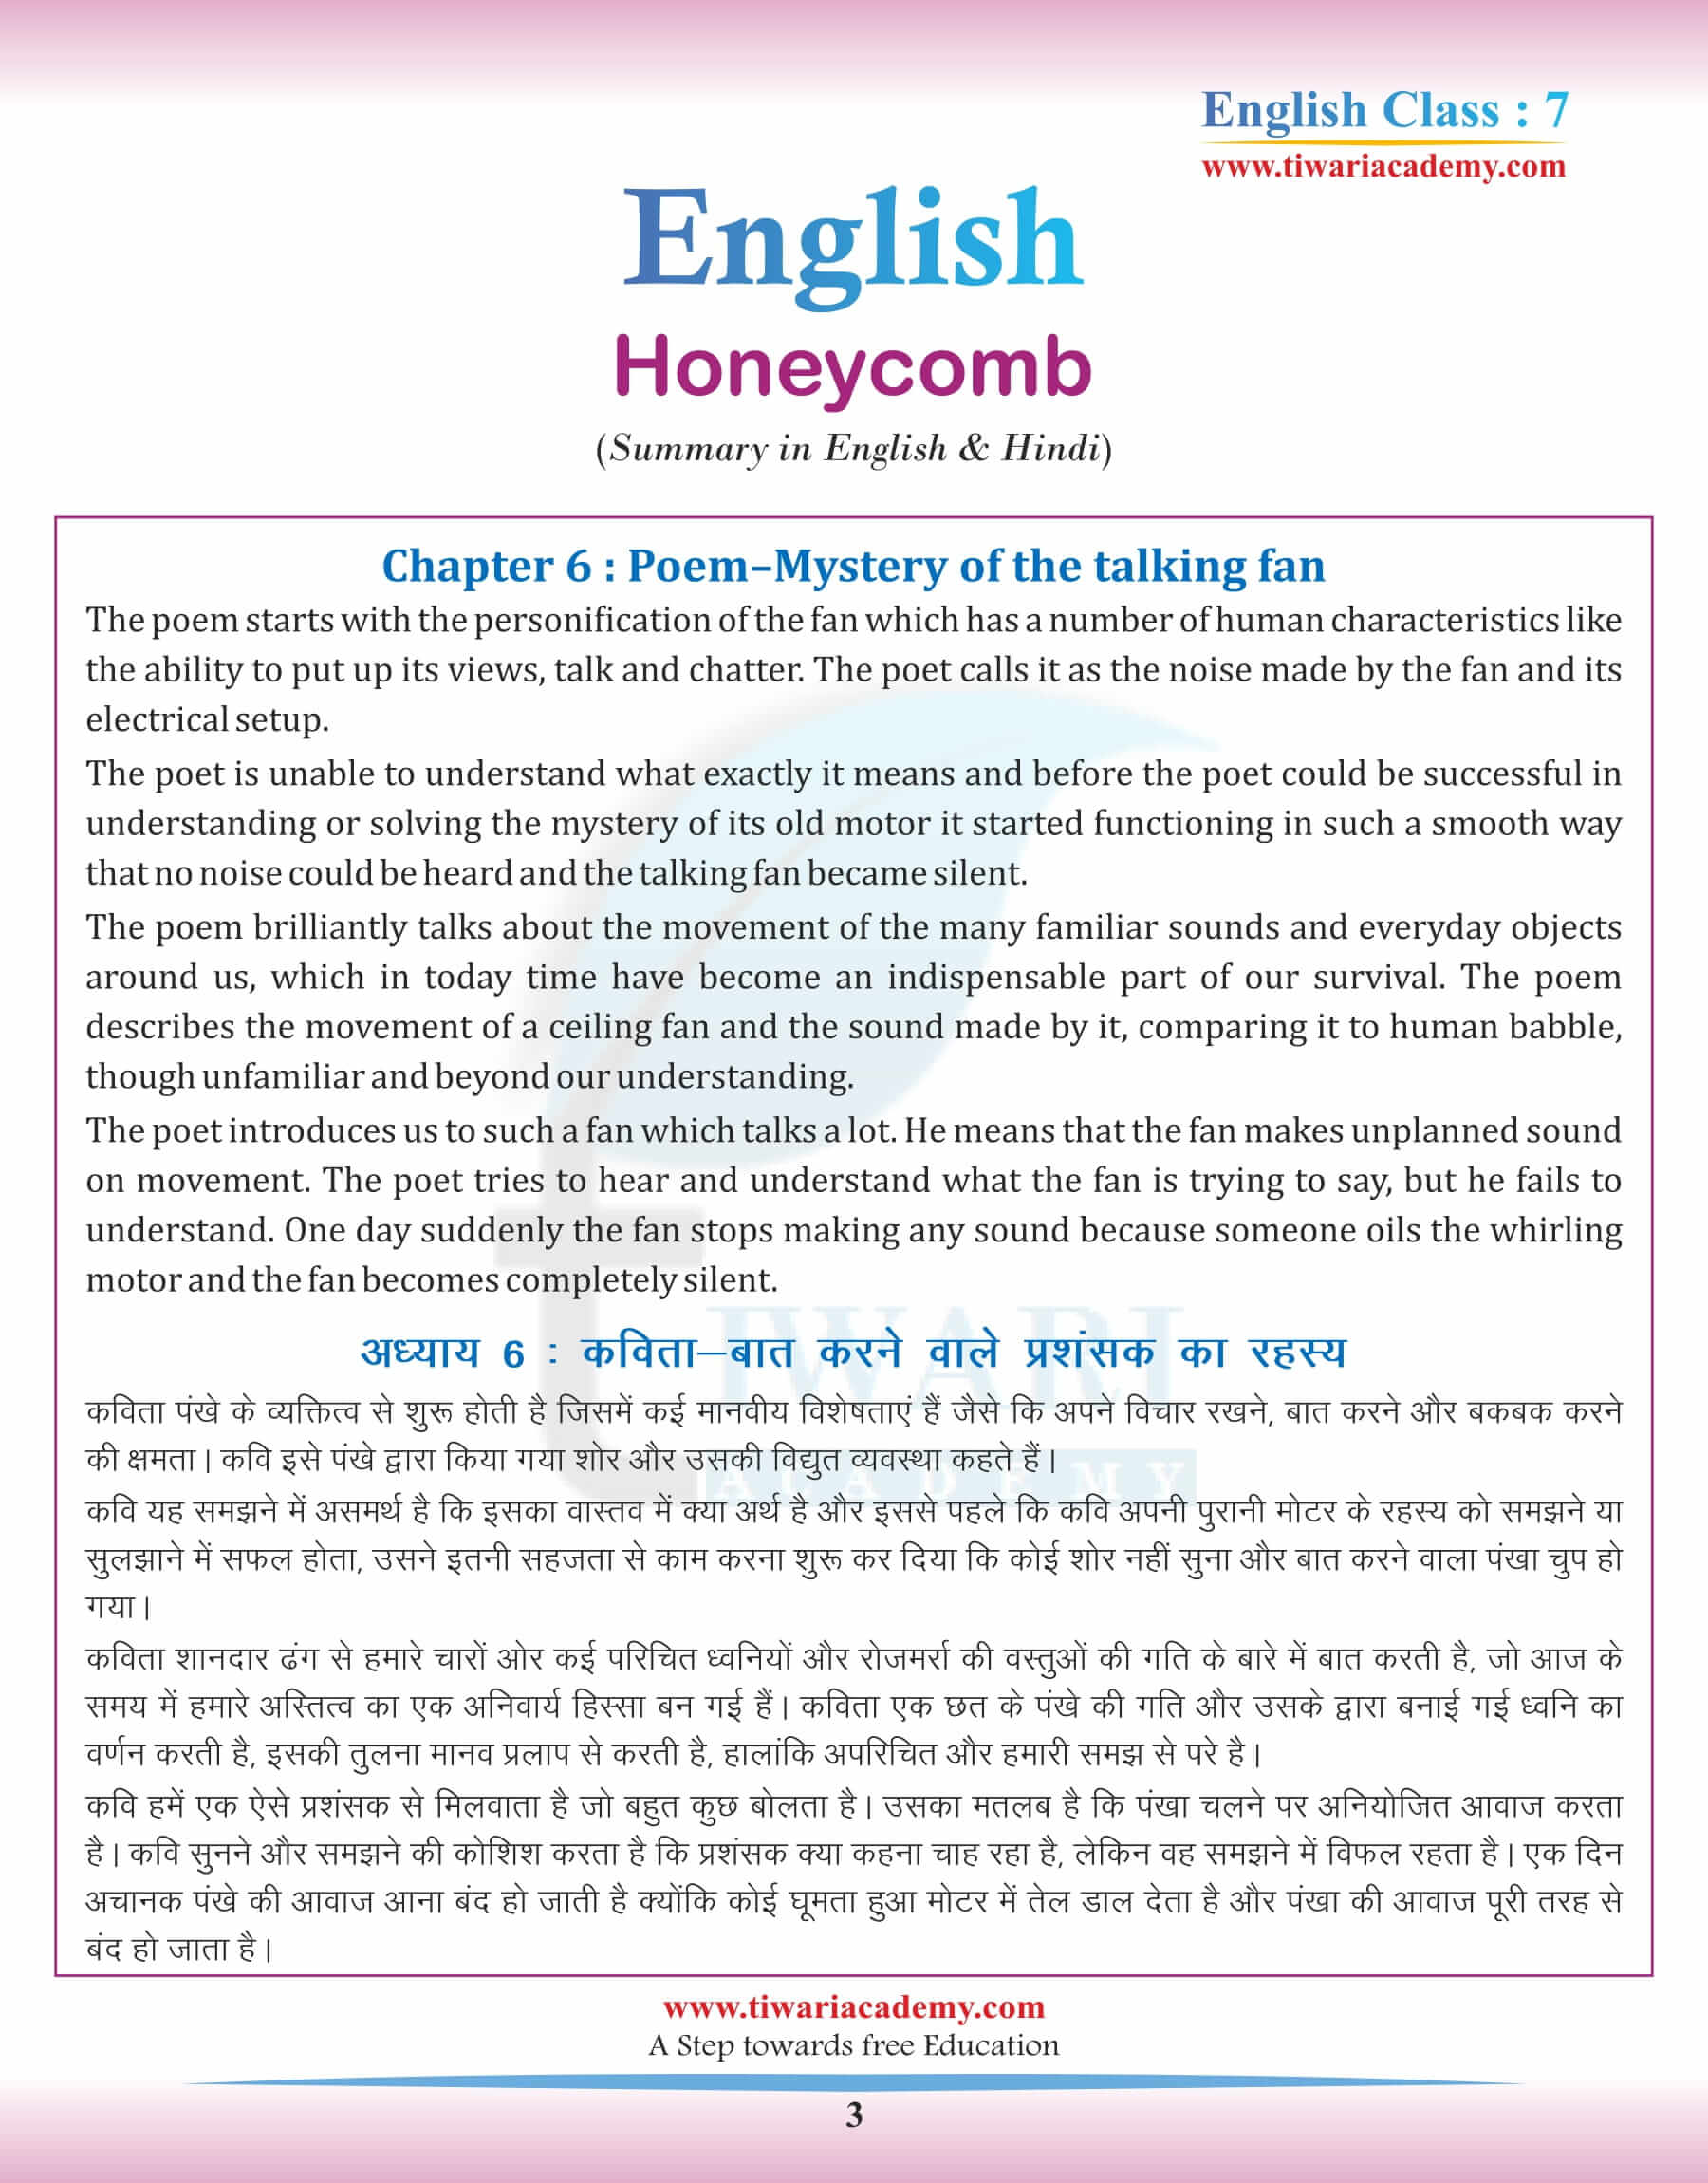 Class 7 English Chapter 6 Summary in Hindi and English